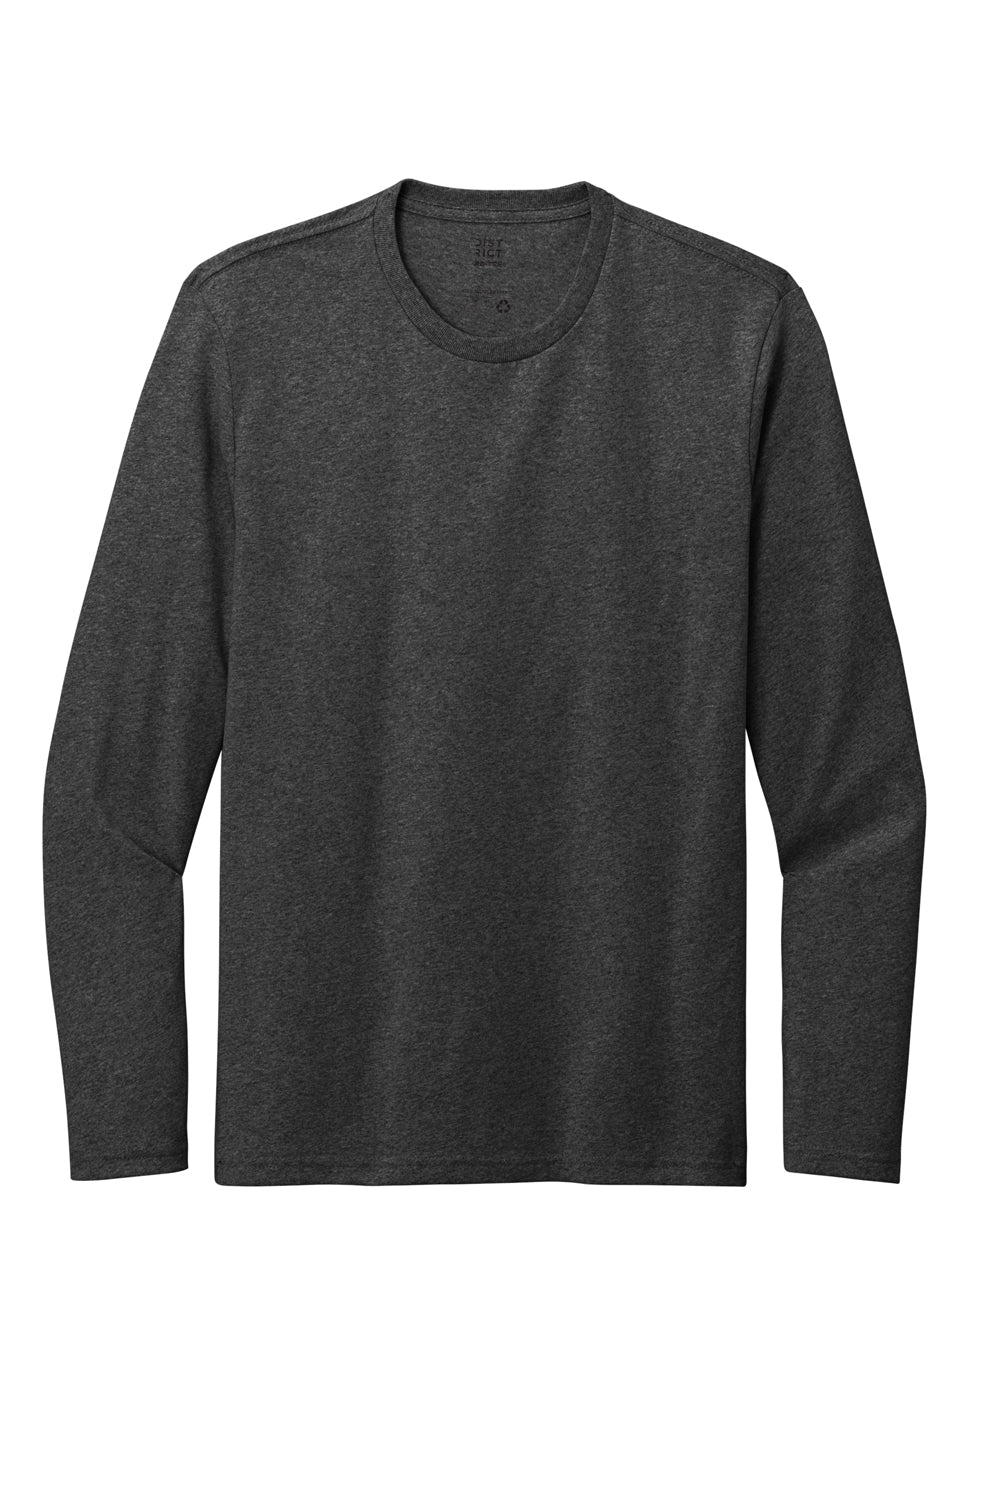 District DT8003 Re-Tee Long Sleeve Crewneck T-Shirt Heather Charcoal Grey Flat Front